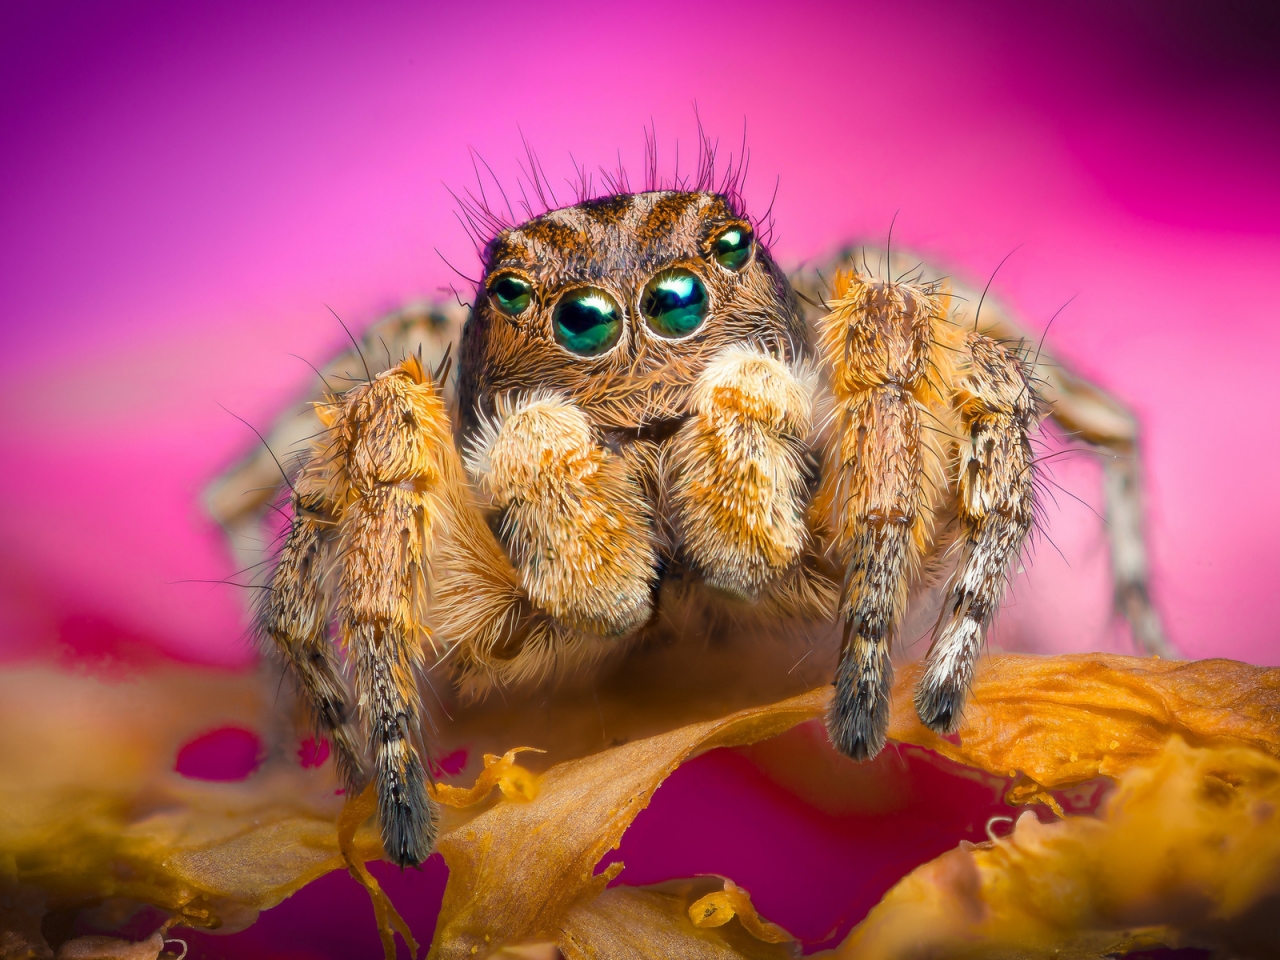 Jumping Spider for 1280 x 960 resolution